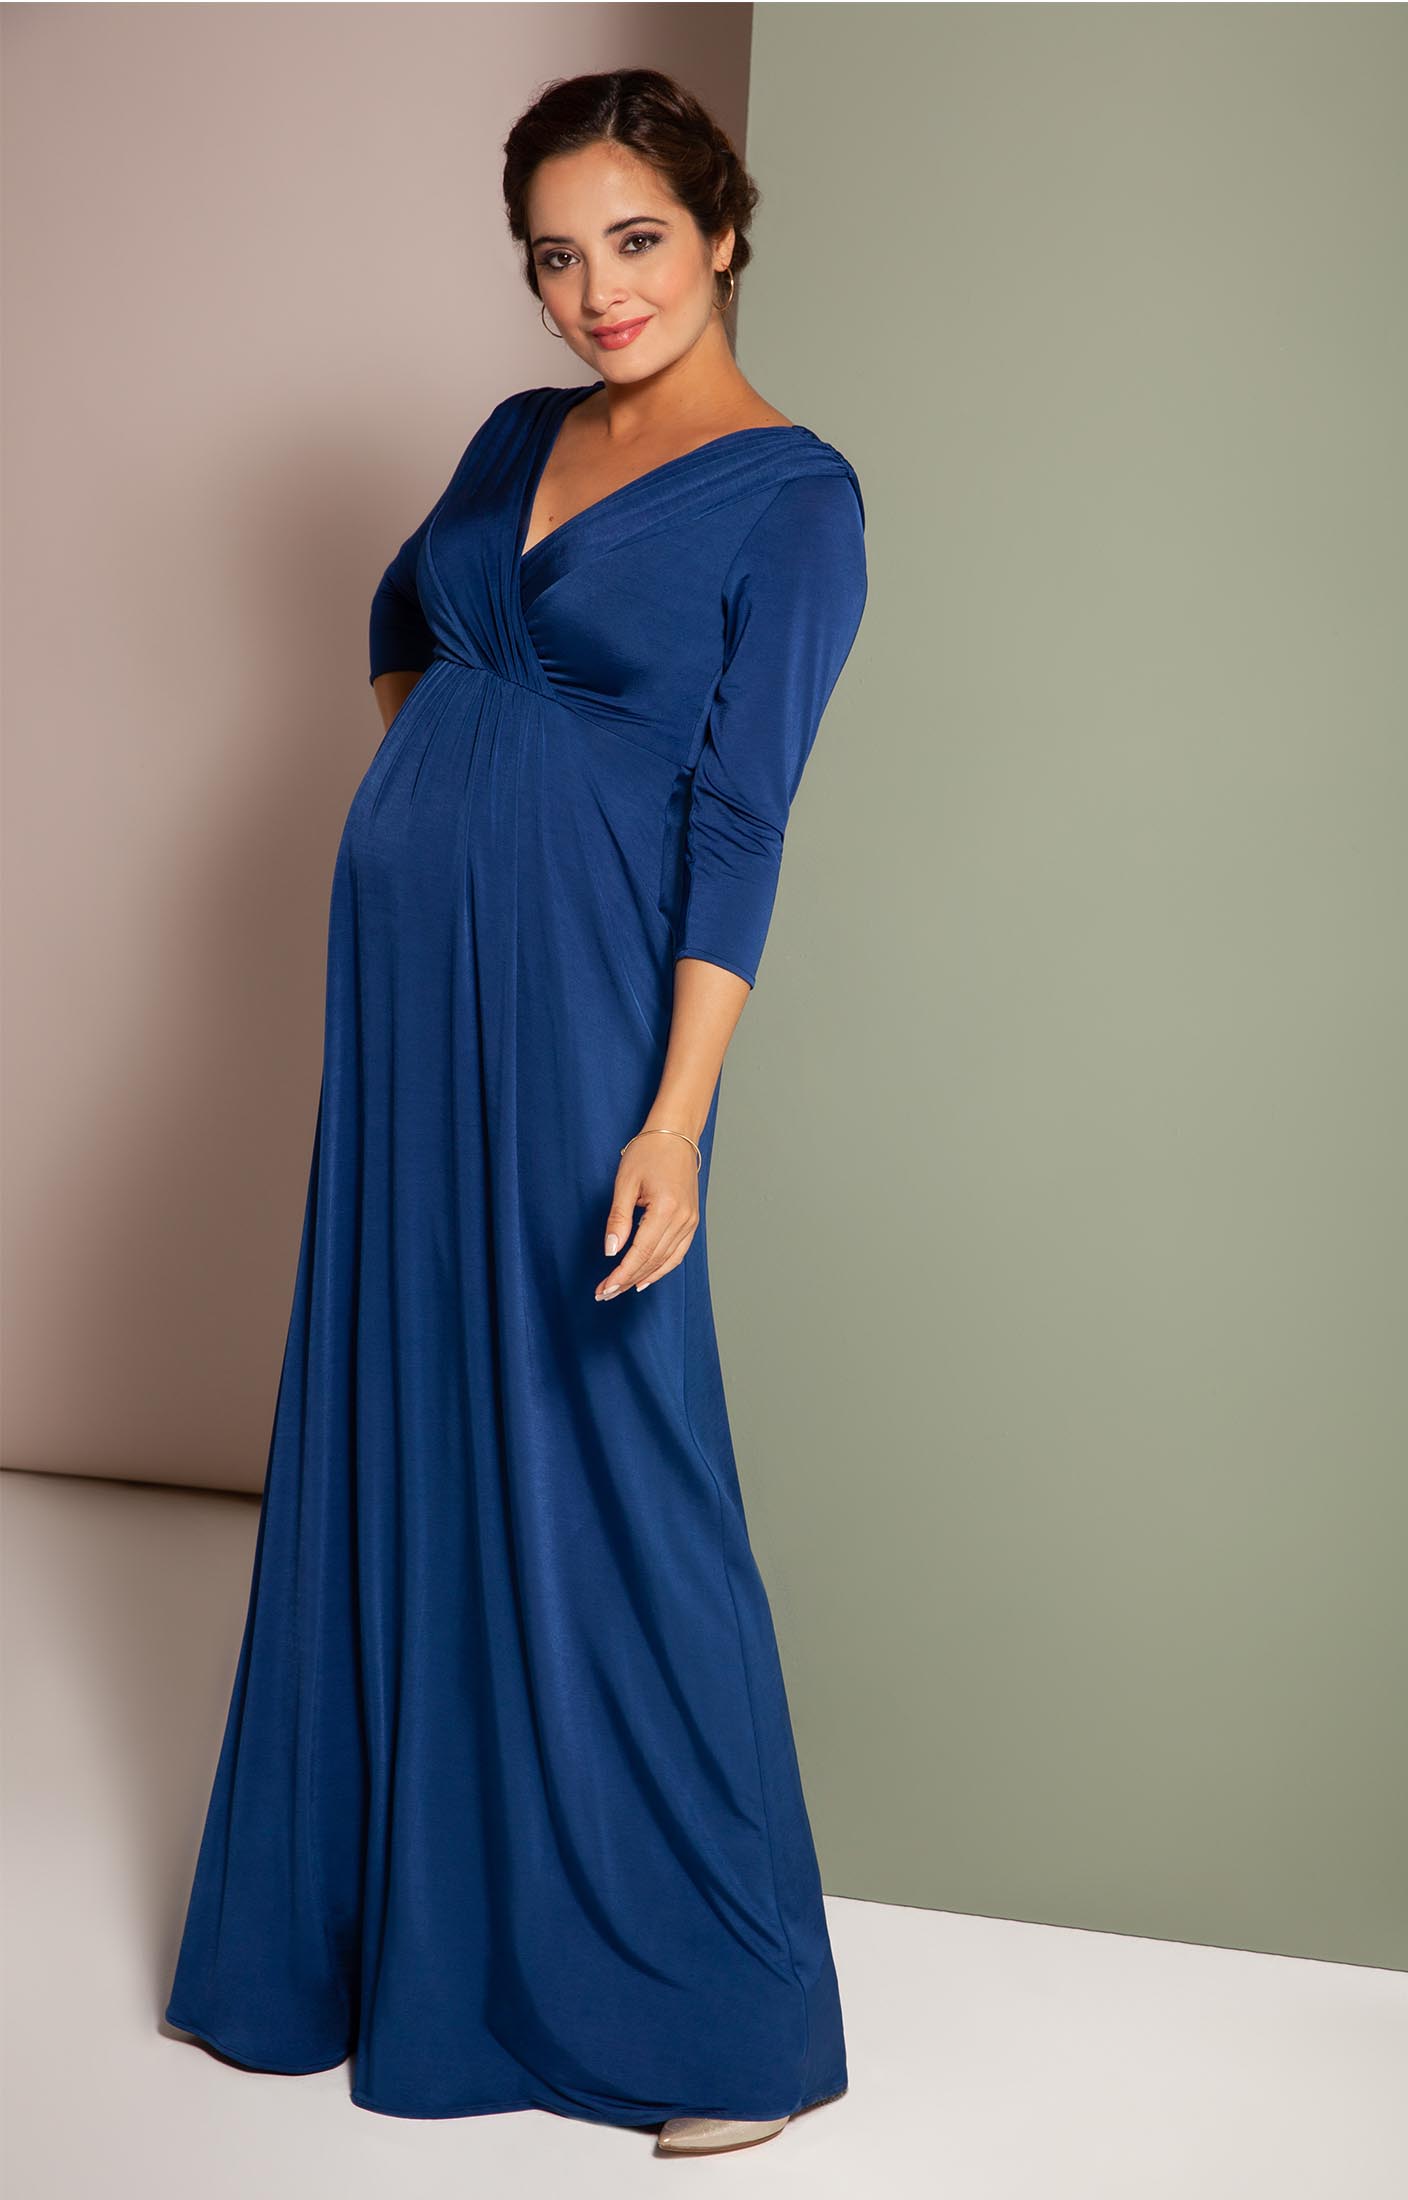 maternity ball gown dresses